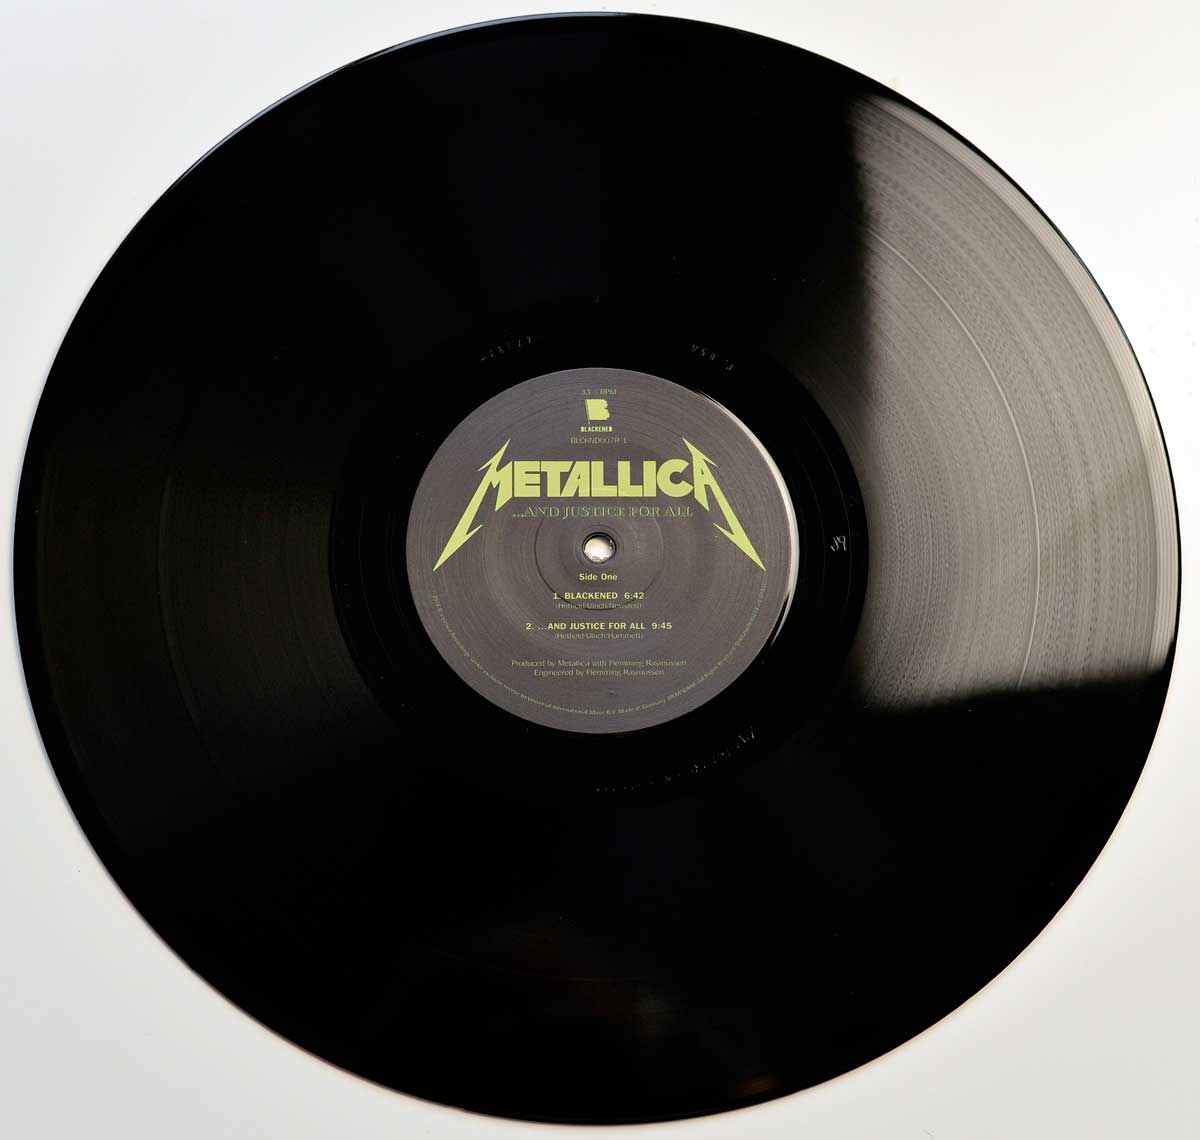 Photo of Side One: METALLICA - And Justice For All Blackened Records 180Gr Vinyl 